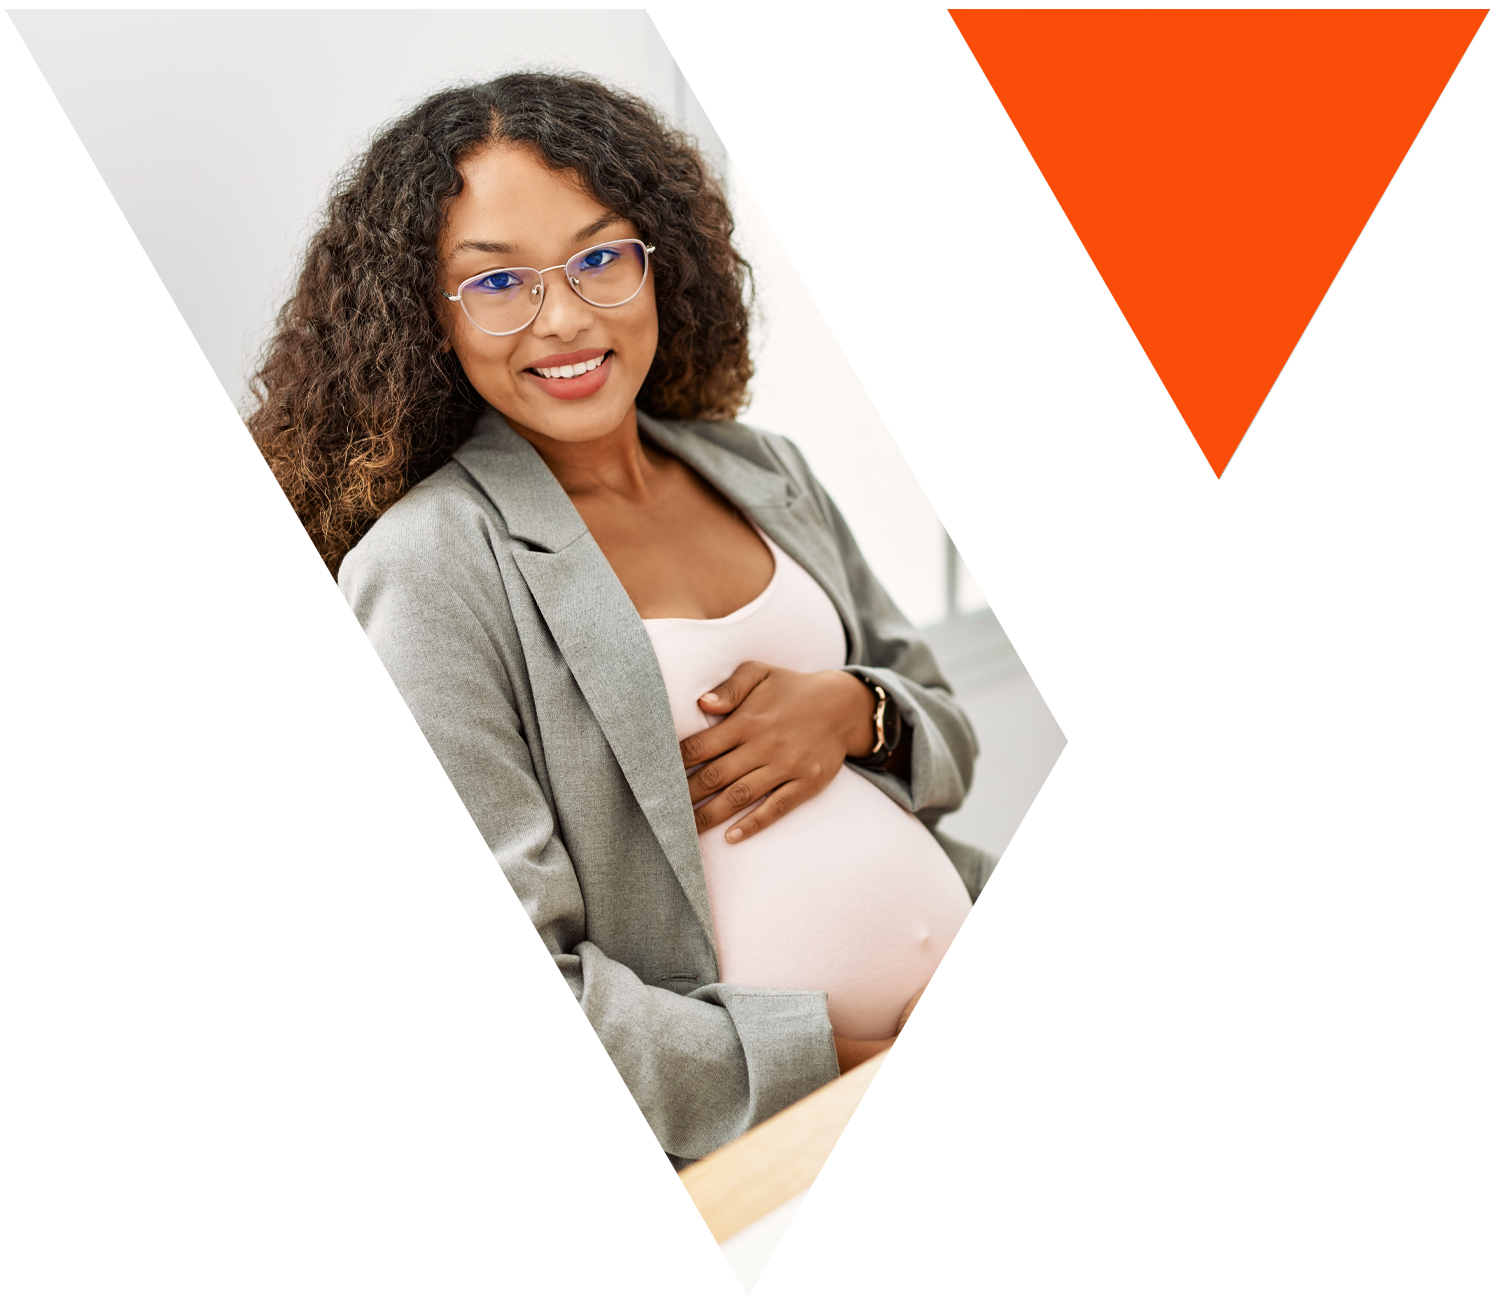 Pregnant person holds belly looking at the camera in image shaped like the Vision Financial Group logo